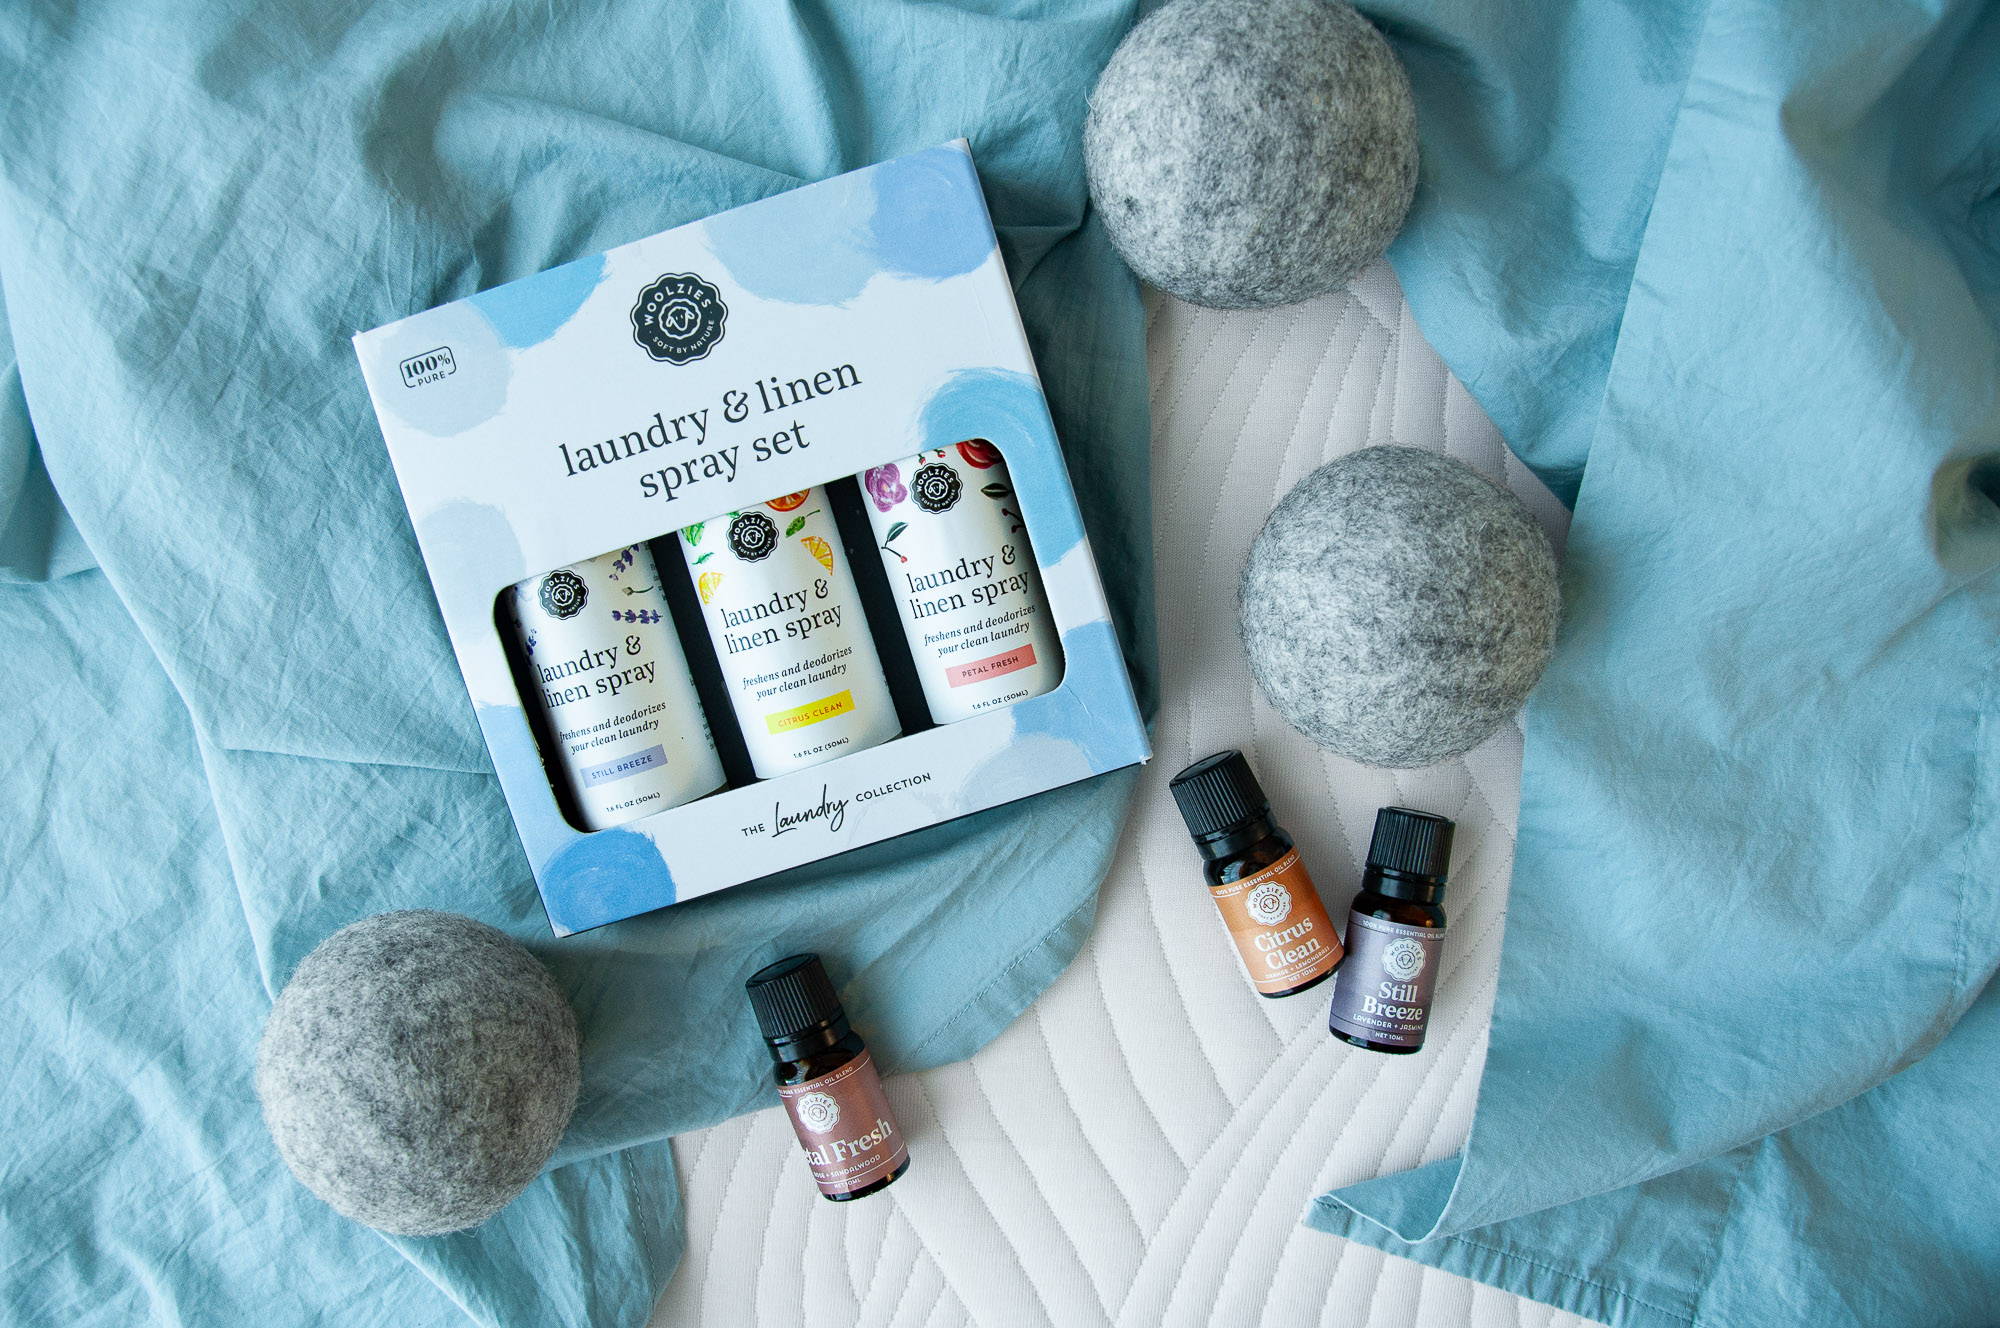 Woolzies laundry collection essential oils, wool dryer balls, and a nest bedding tencel pillowcase set laying atop a waffle knit throw